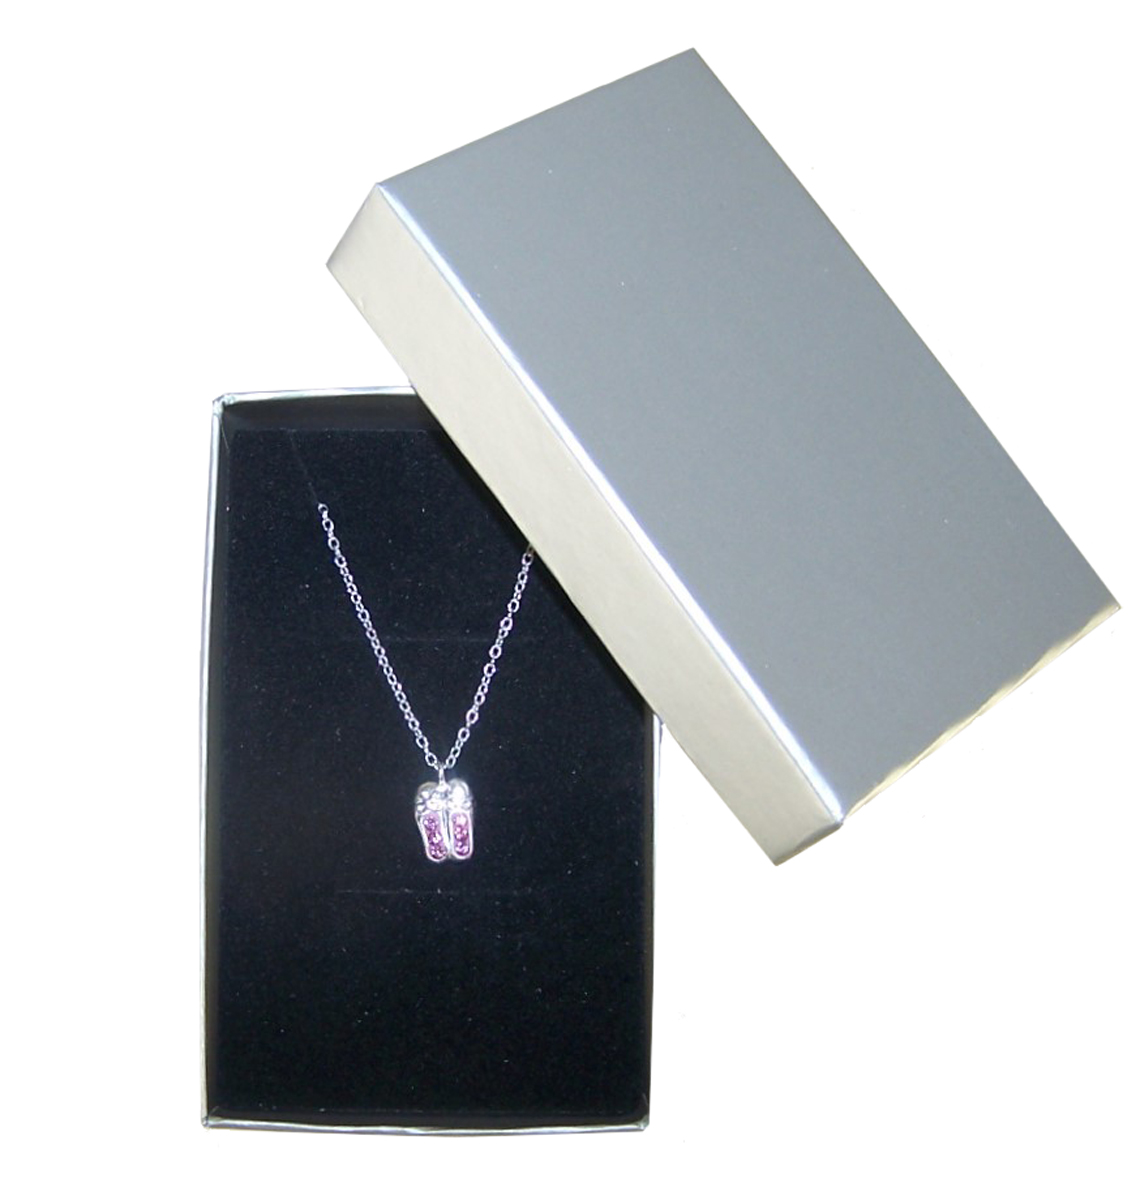 Girls pink crystal ballet shoes 925 sterling silver necklace and stud earrings set-4607